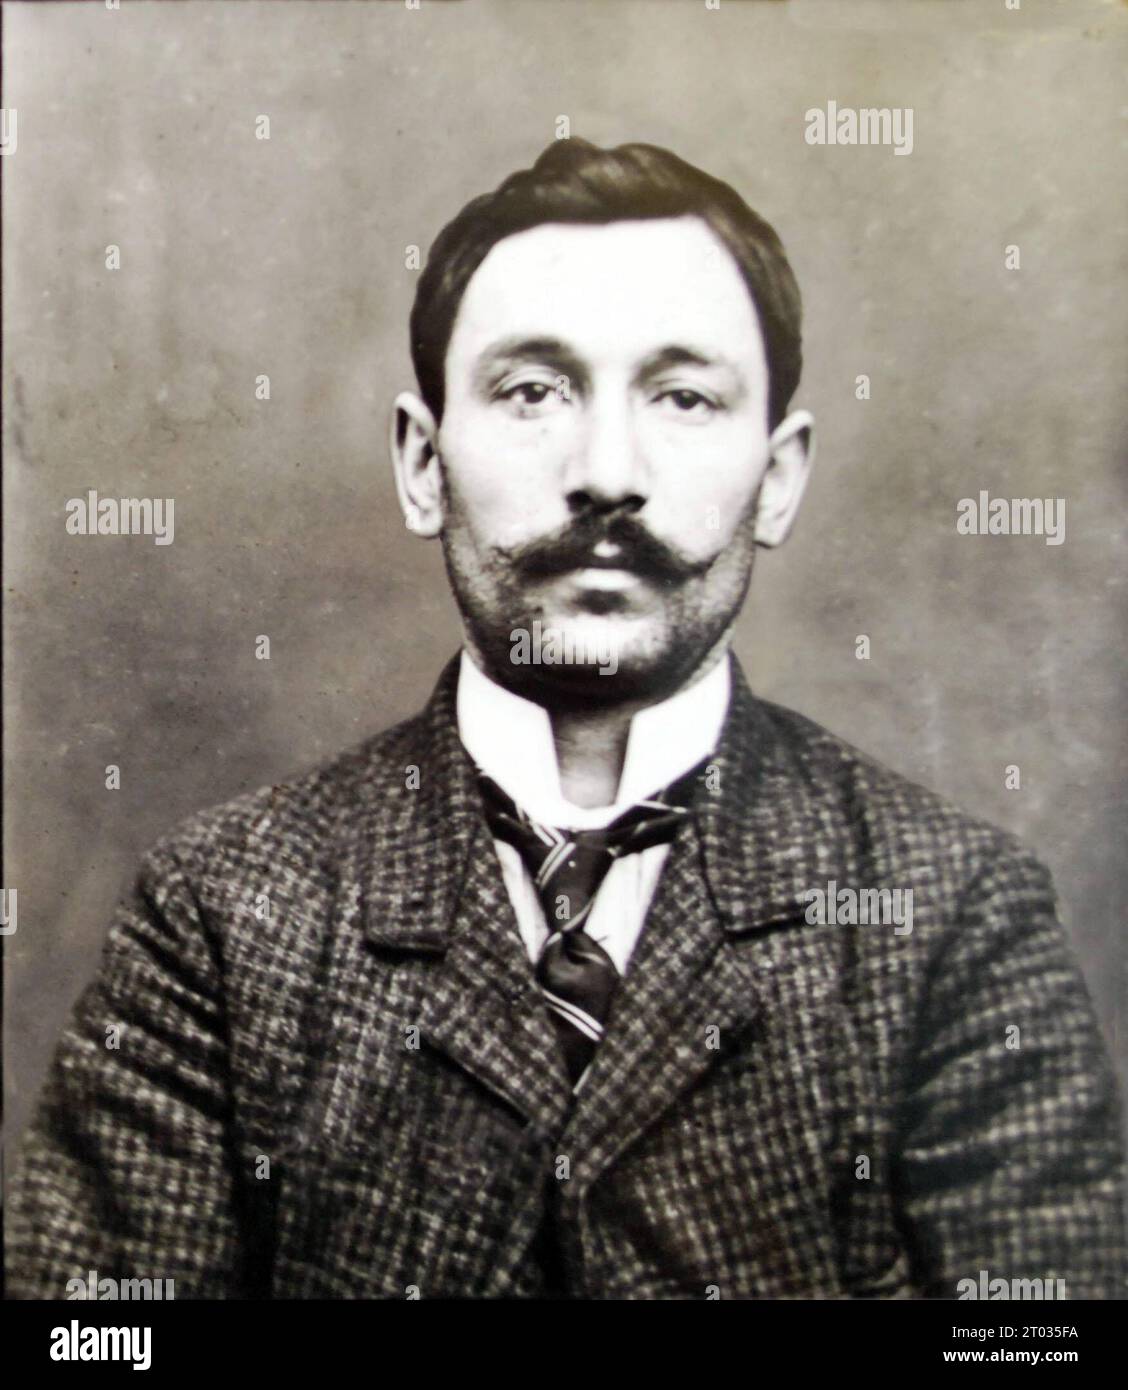 Vincenzo Peruggia (1881 – 1925) Italian museum worker, artist and thief, most famous for stealing the Mona Lisa from the Louvre museum in Paris on 21 August 1911. Vincenzo Peruggia, believed to have stolen the Mona Lisa in 1911. Stock Photo